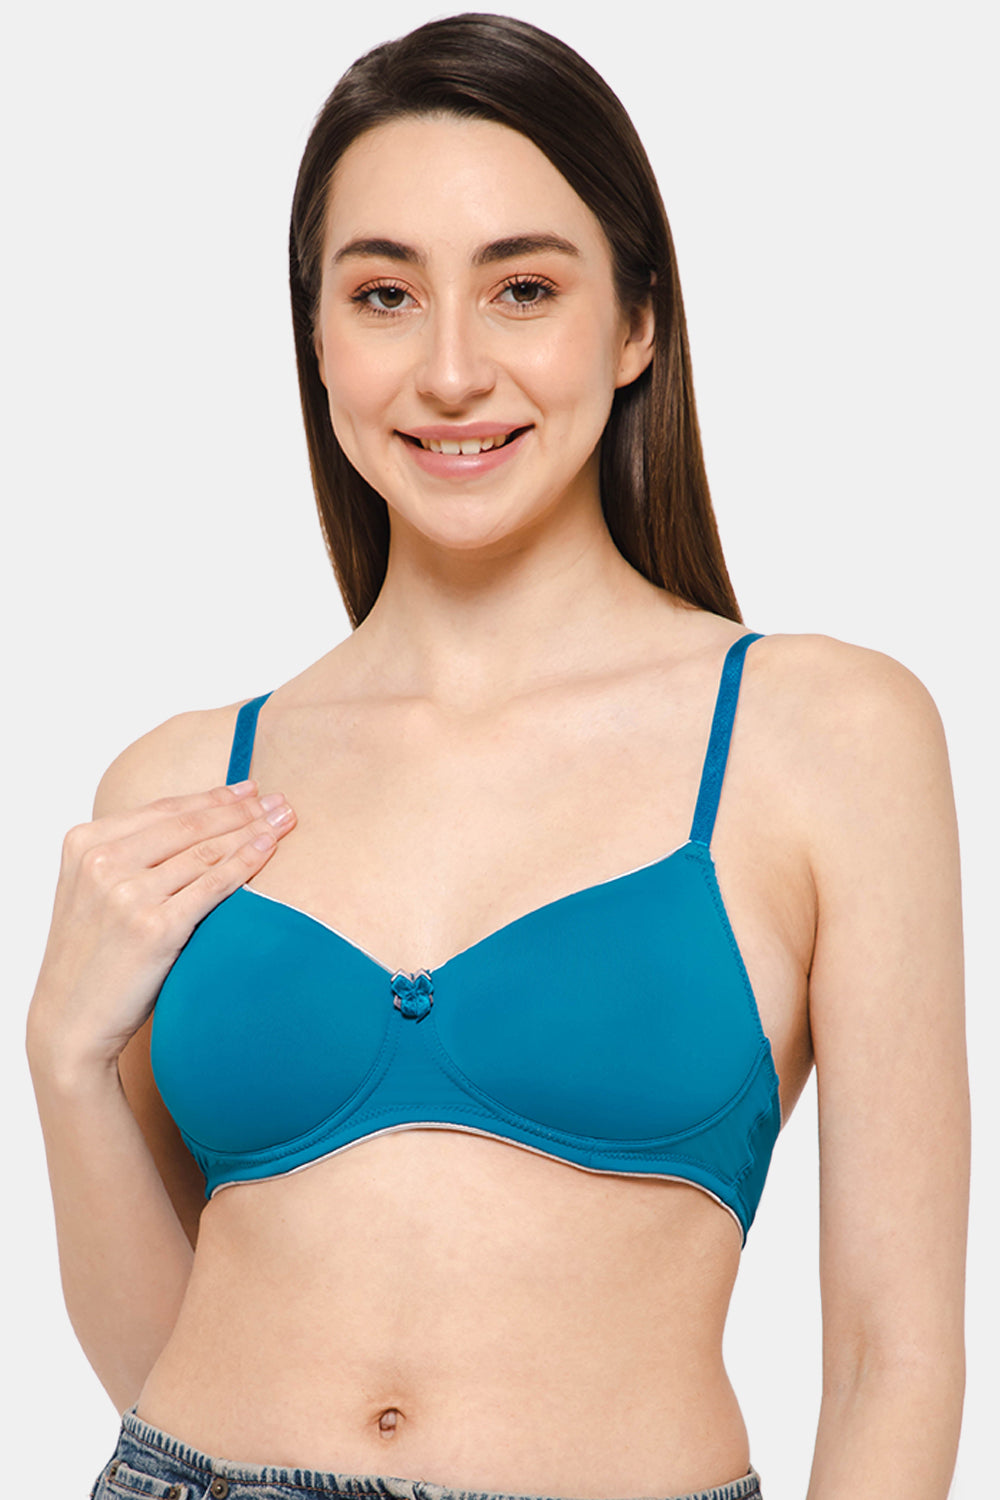 Affrodabel size inclusize bras without all that extra padding